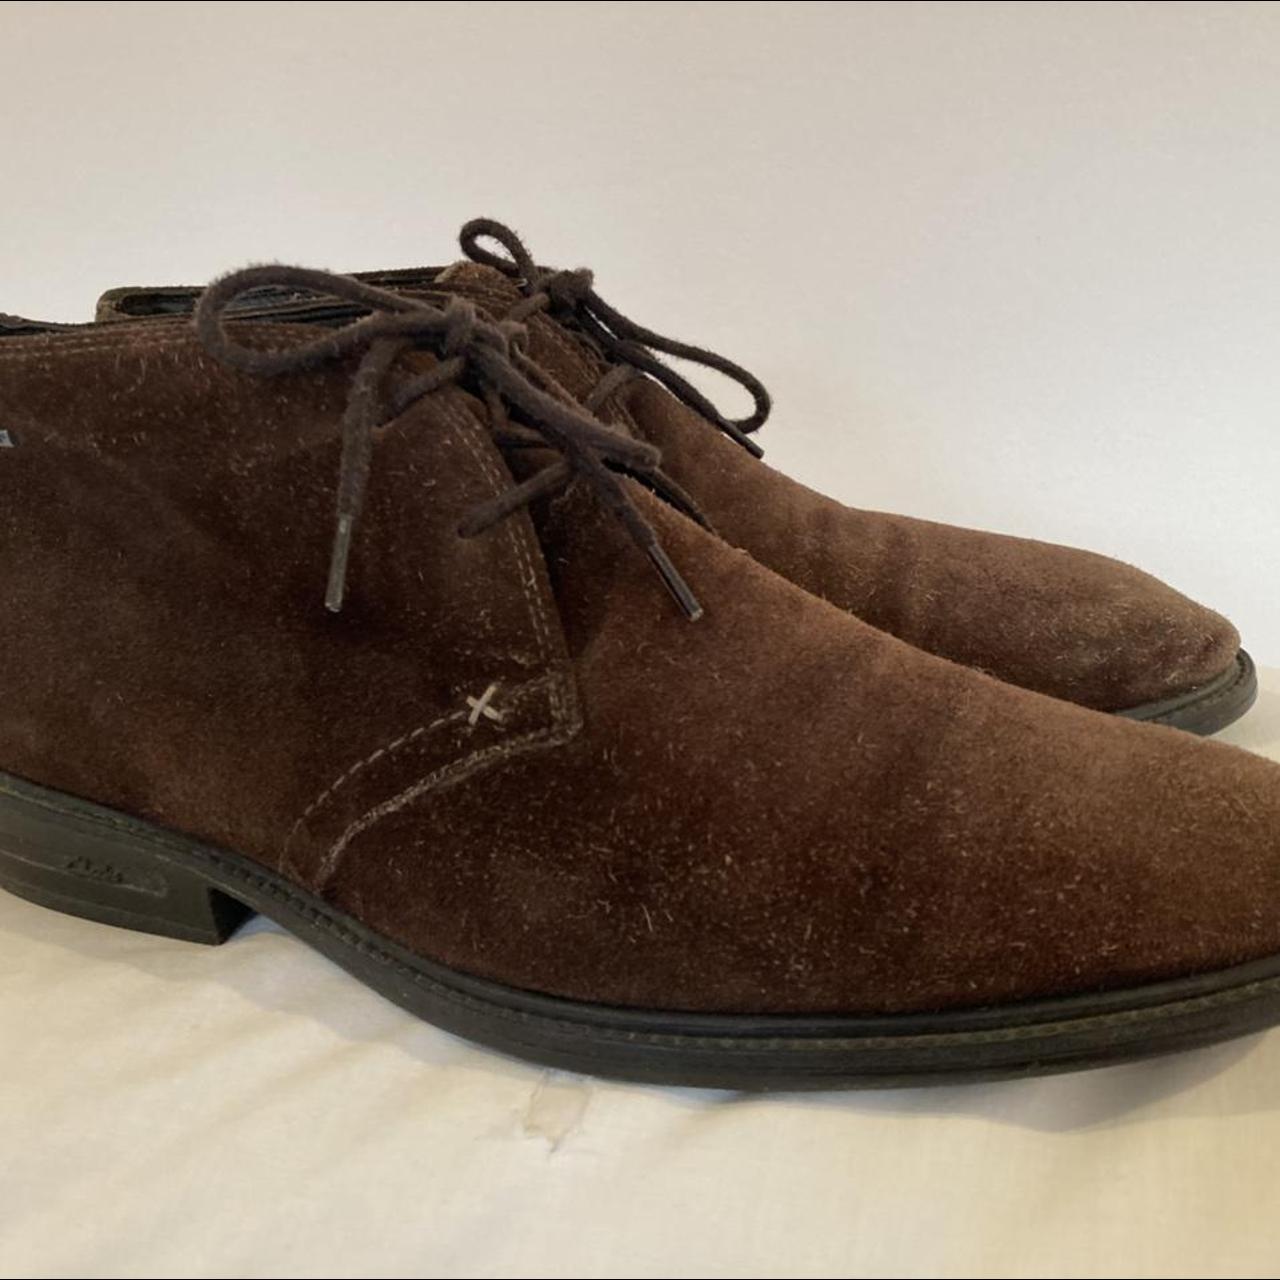 Product Image 1 - Men’s Brown Suede Gortex Ankle